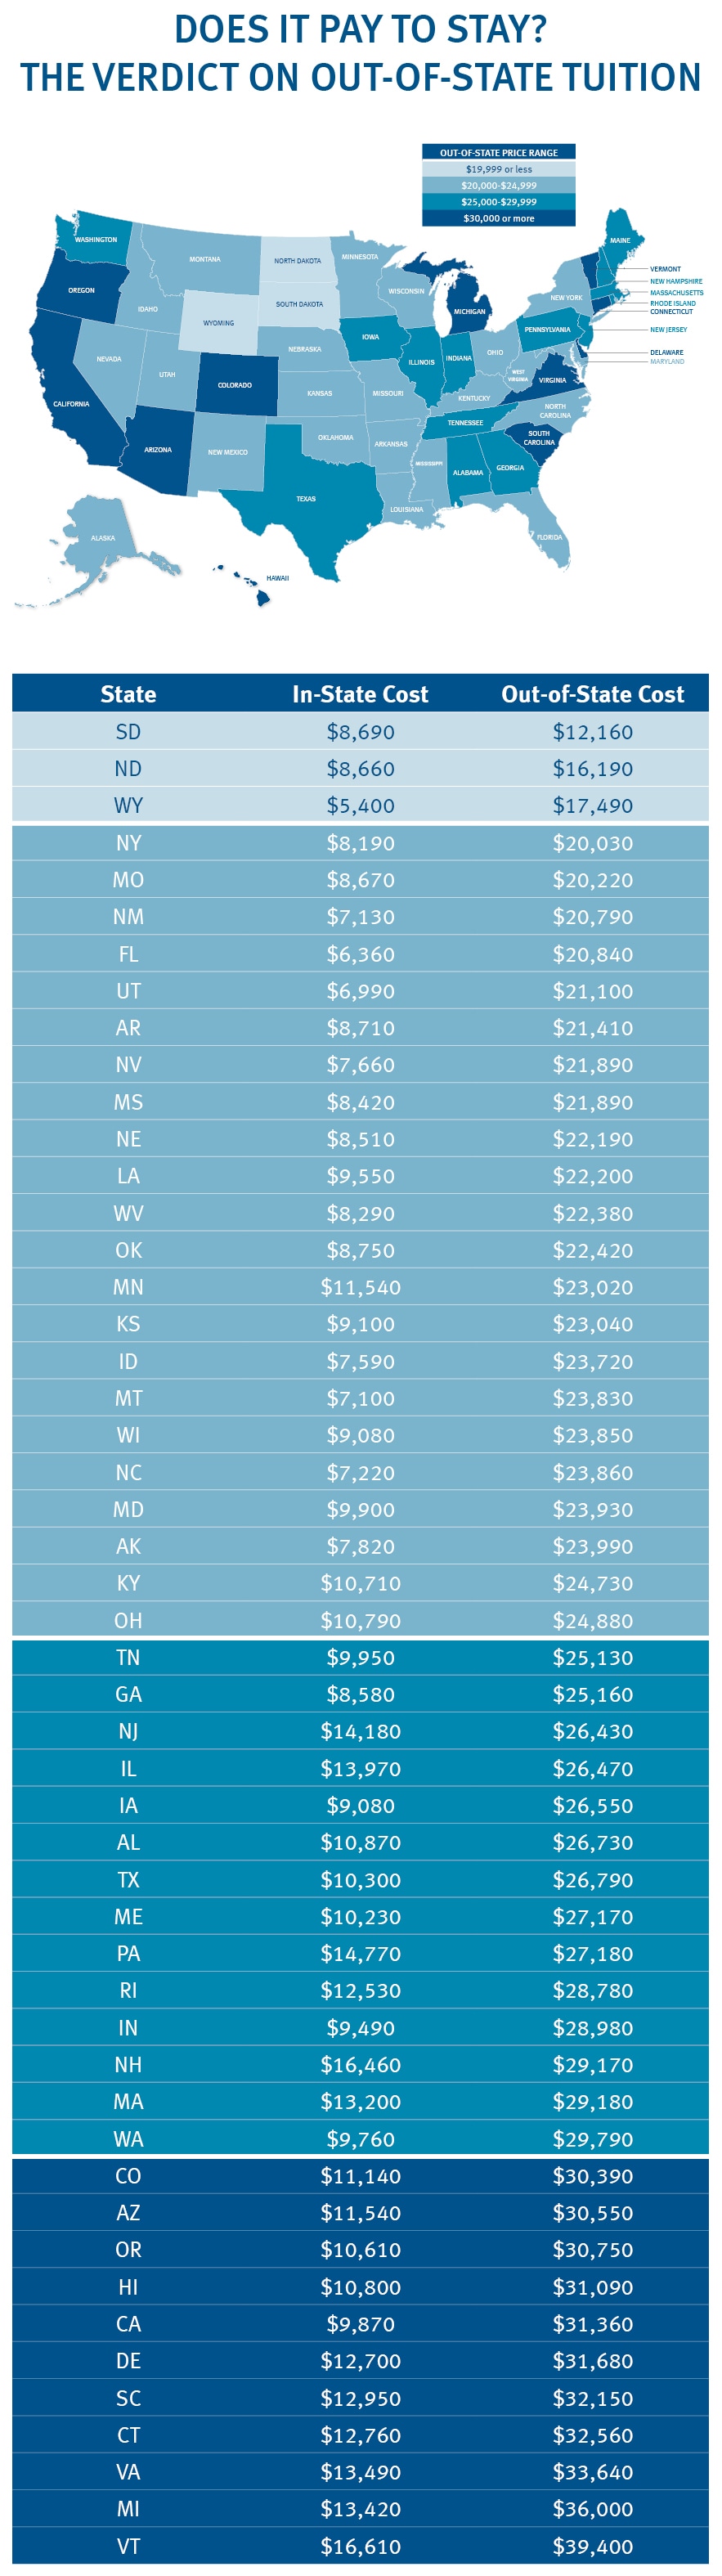 In-State vs Out-of-State Tuition by State Infographic